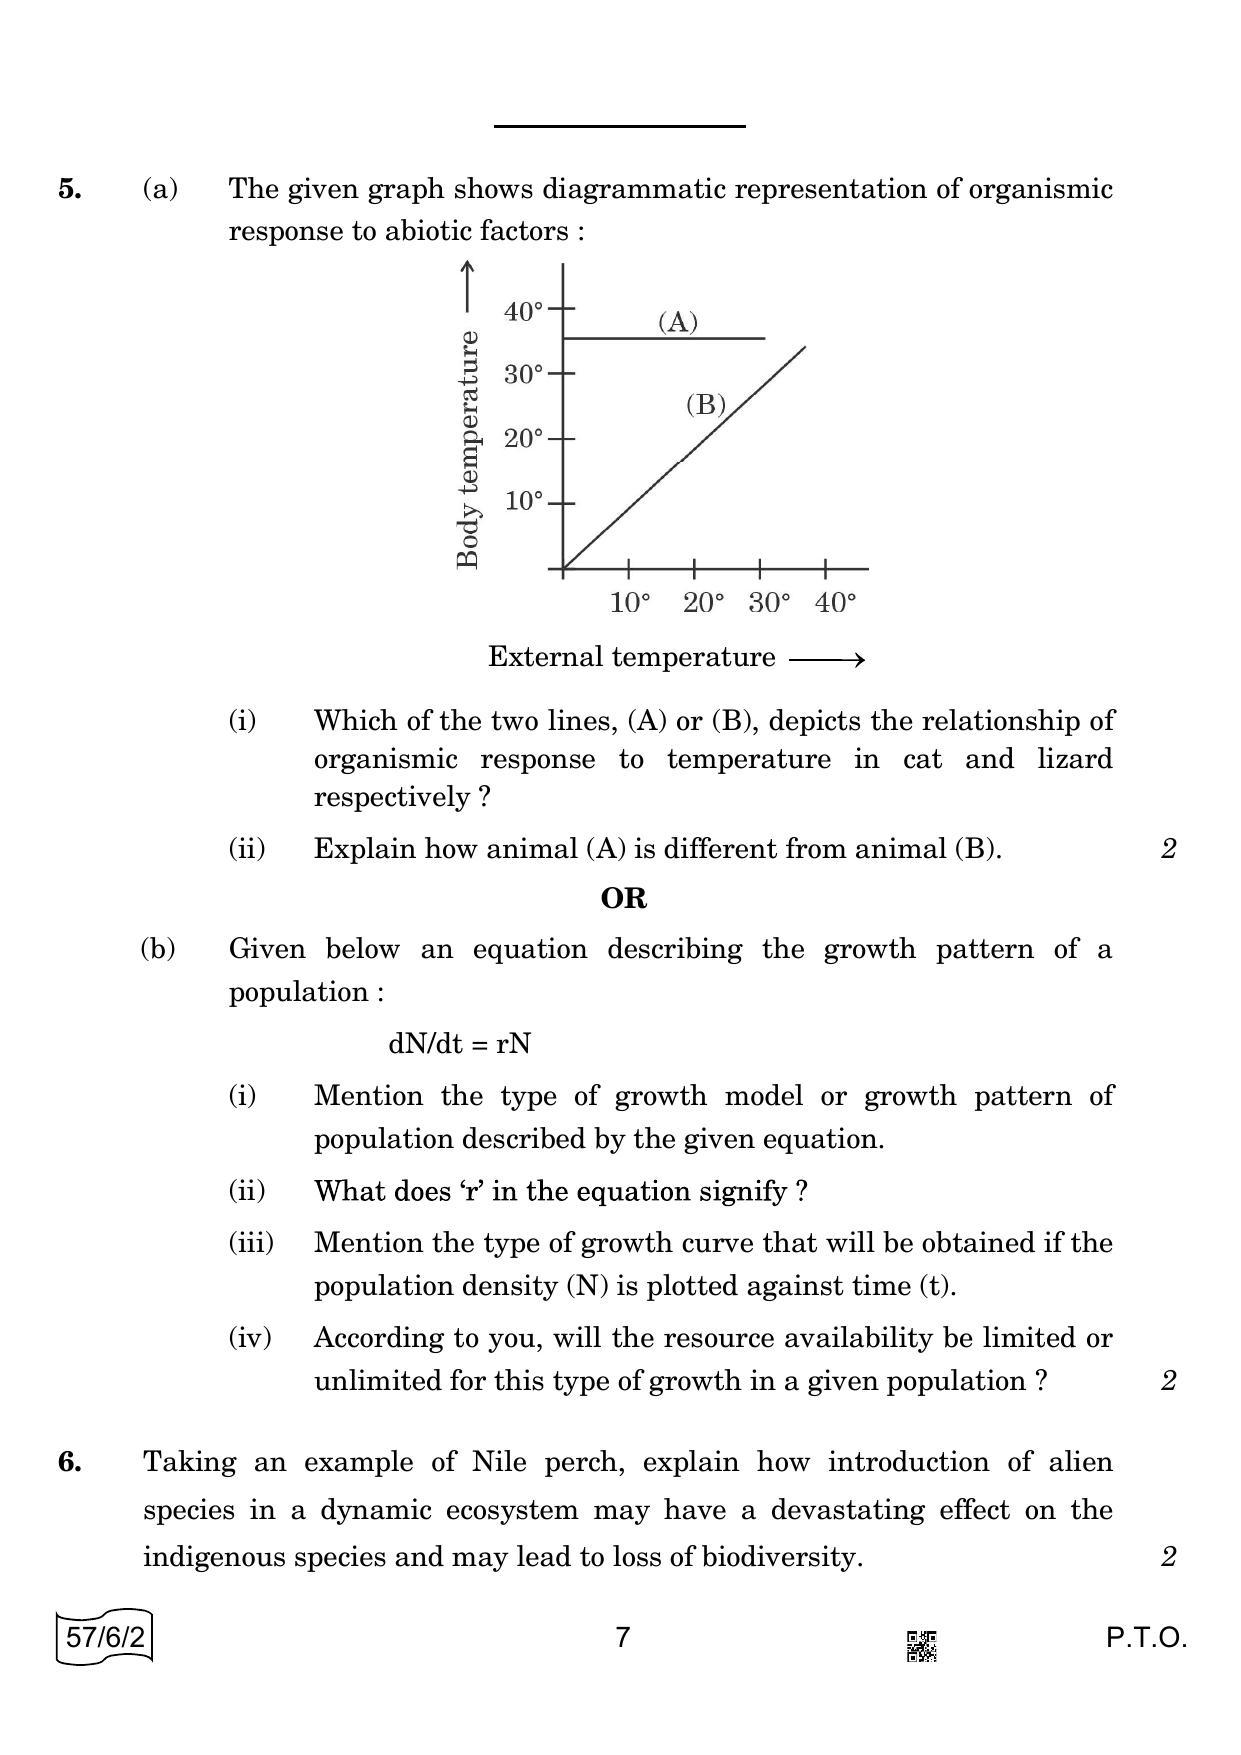 CBSE Class 12 57-6-2 BIOLOGY 2022 Compartment Question Paper - Page 7